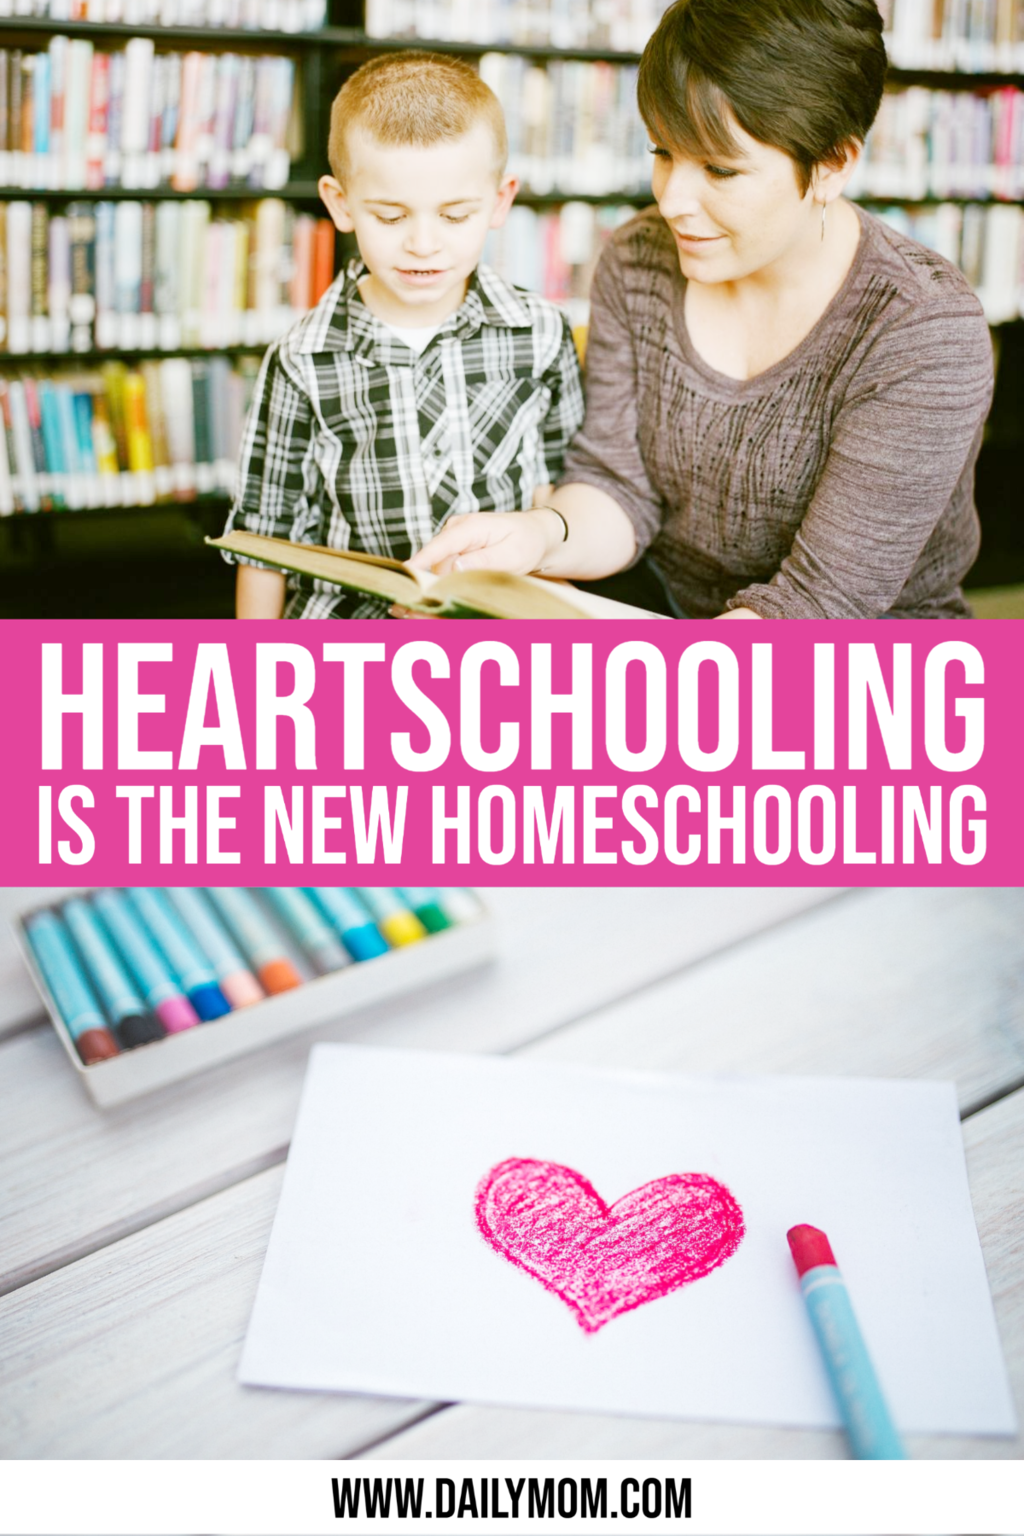 Moral Development And Why “Heartschooling” Is The New And Improved Homeschooling